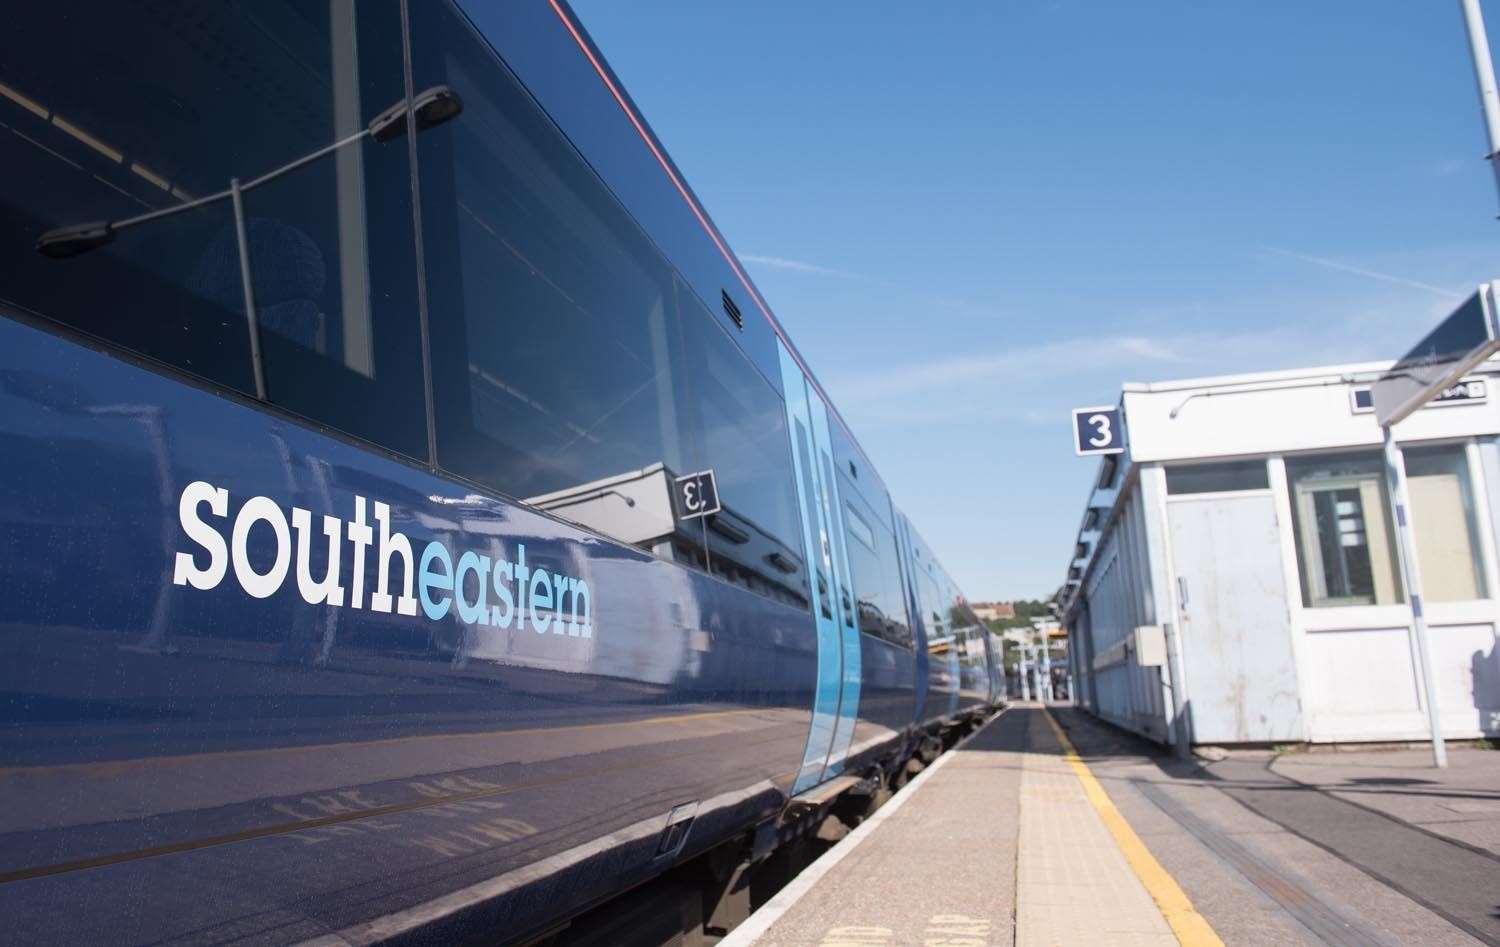 Trains are not running between Faversham and Margate